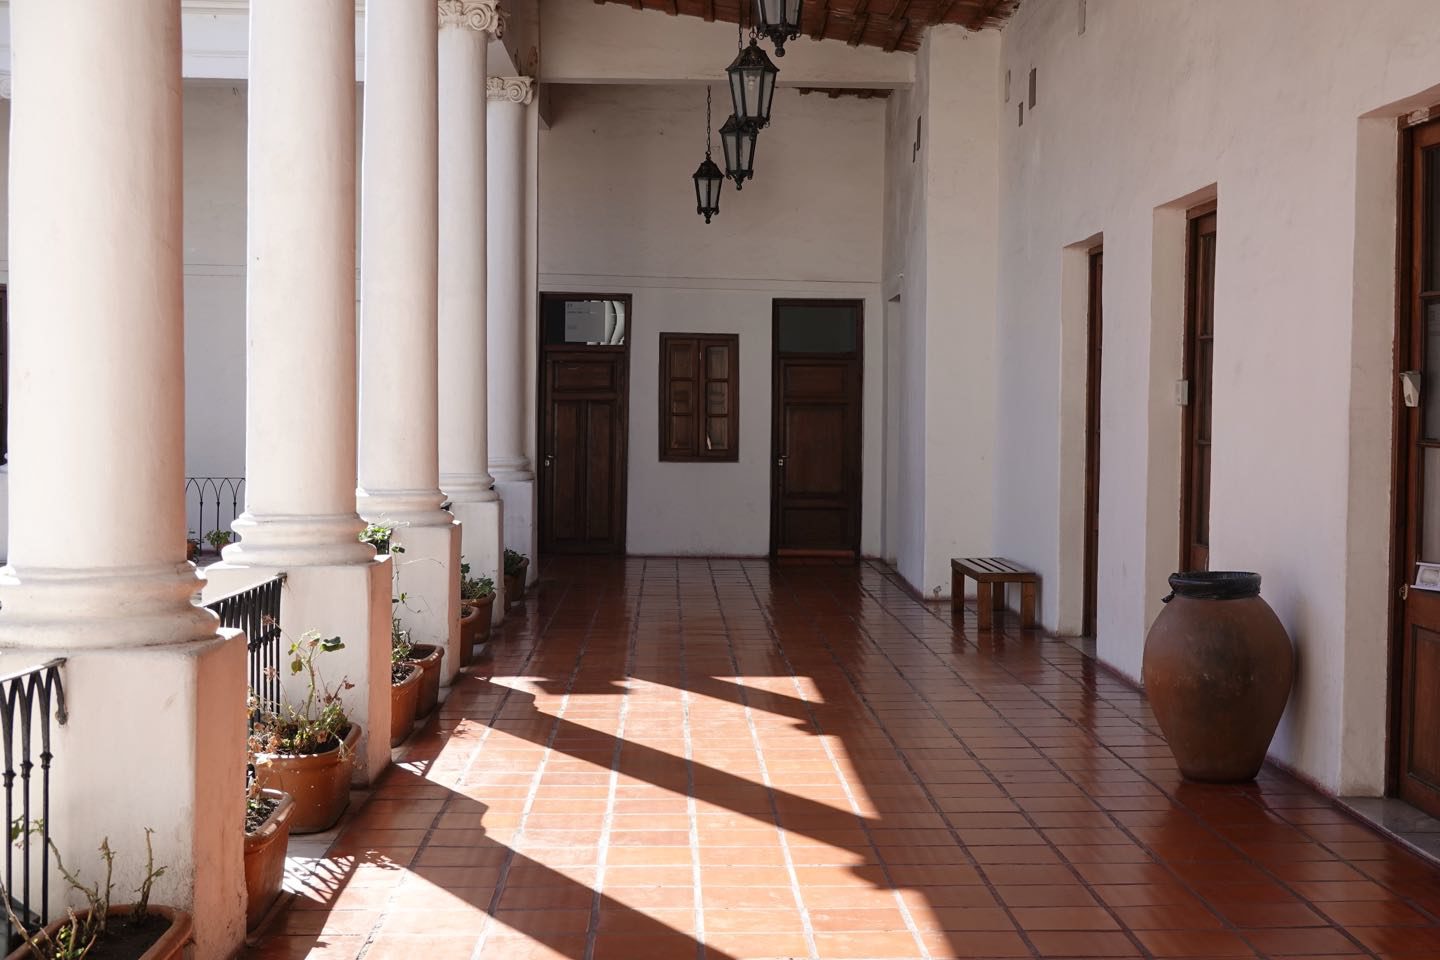 gallery inside the Cabildo on the first floor